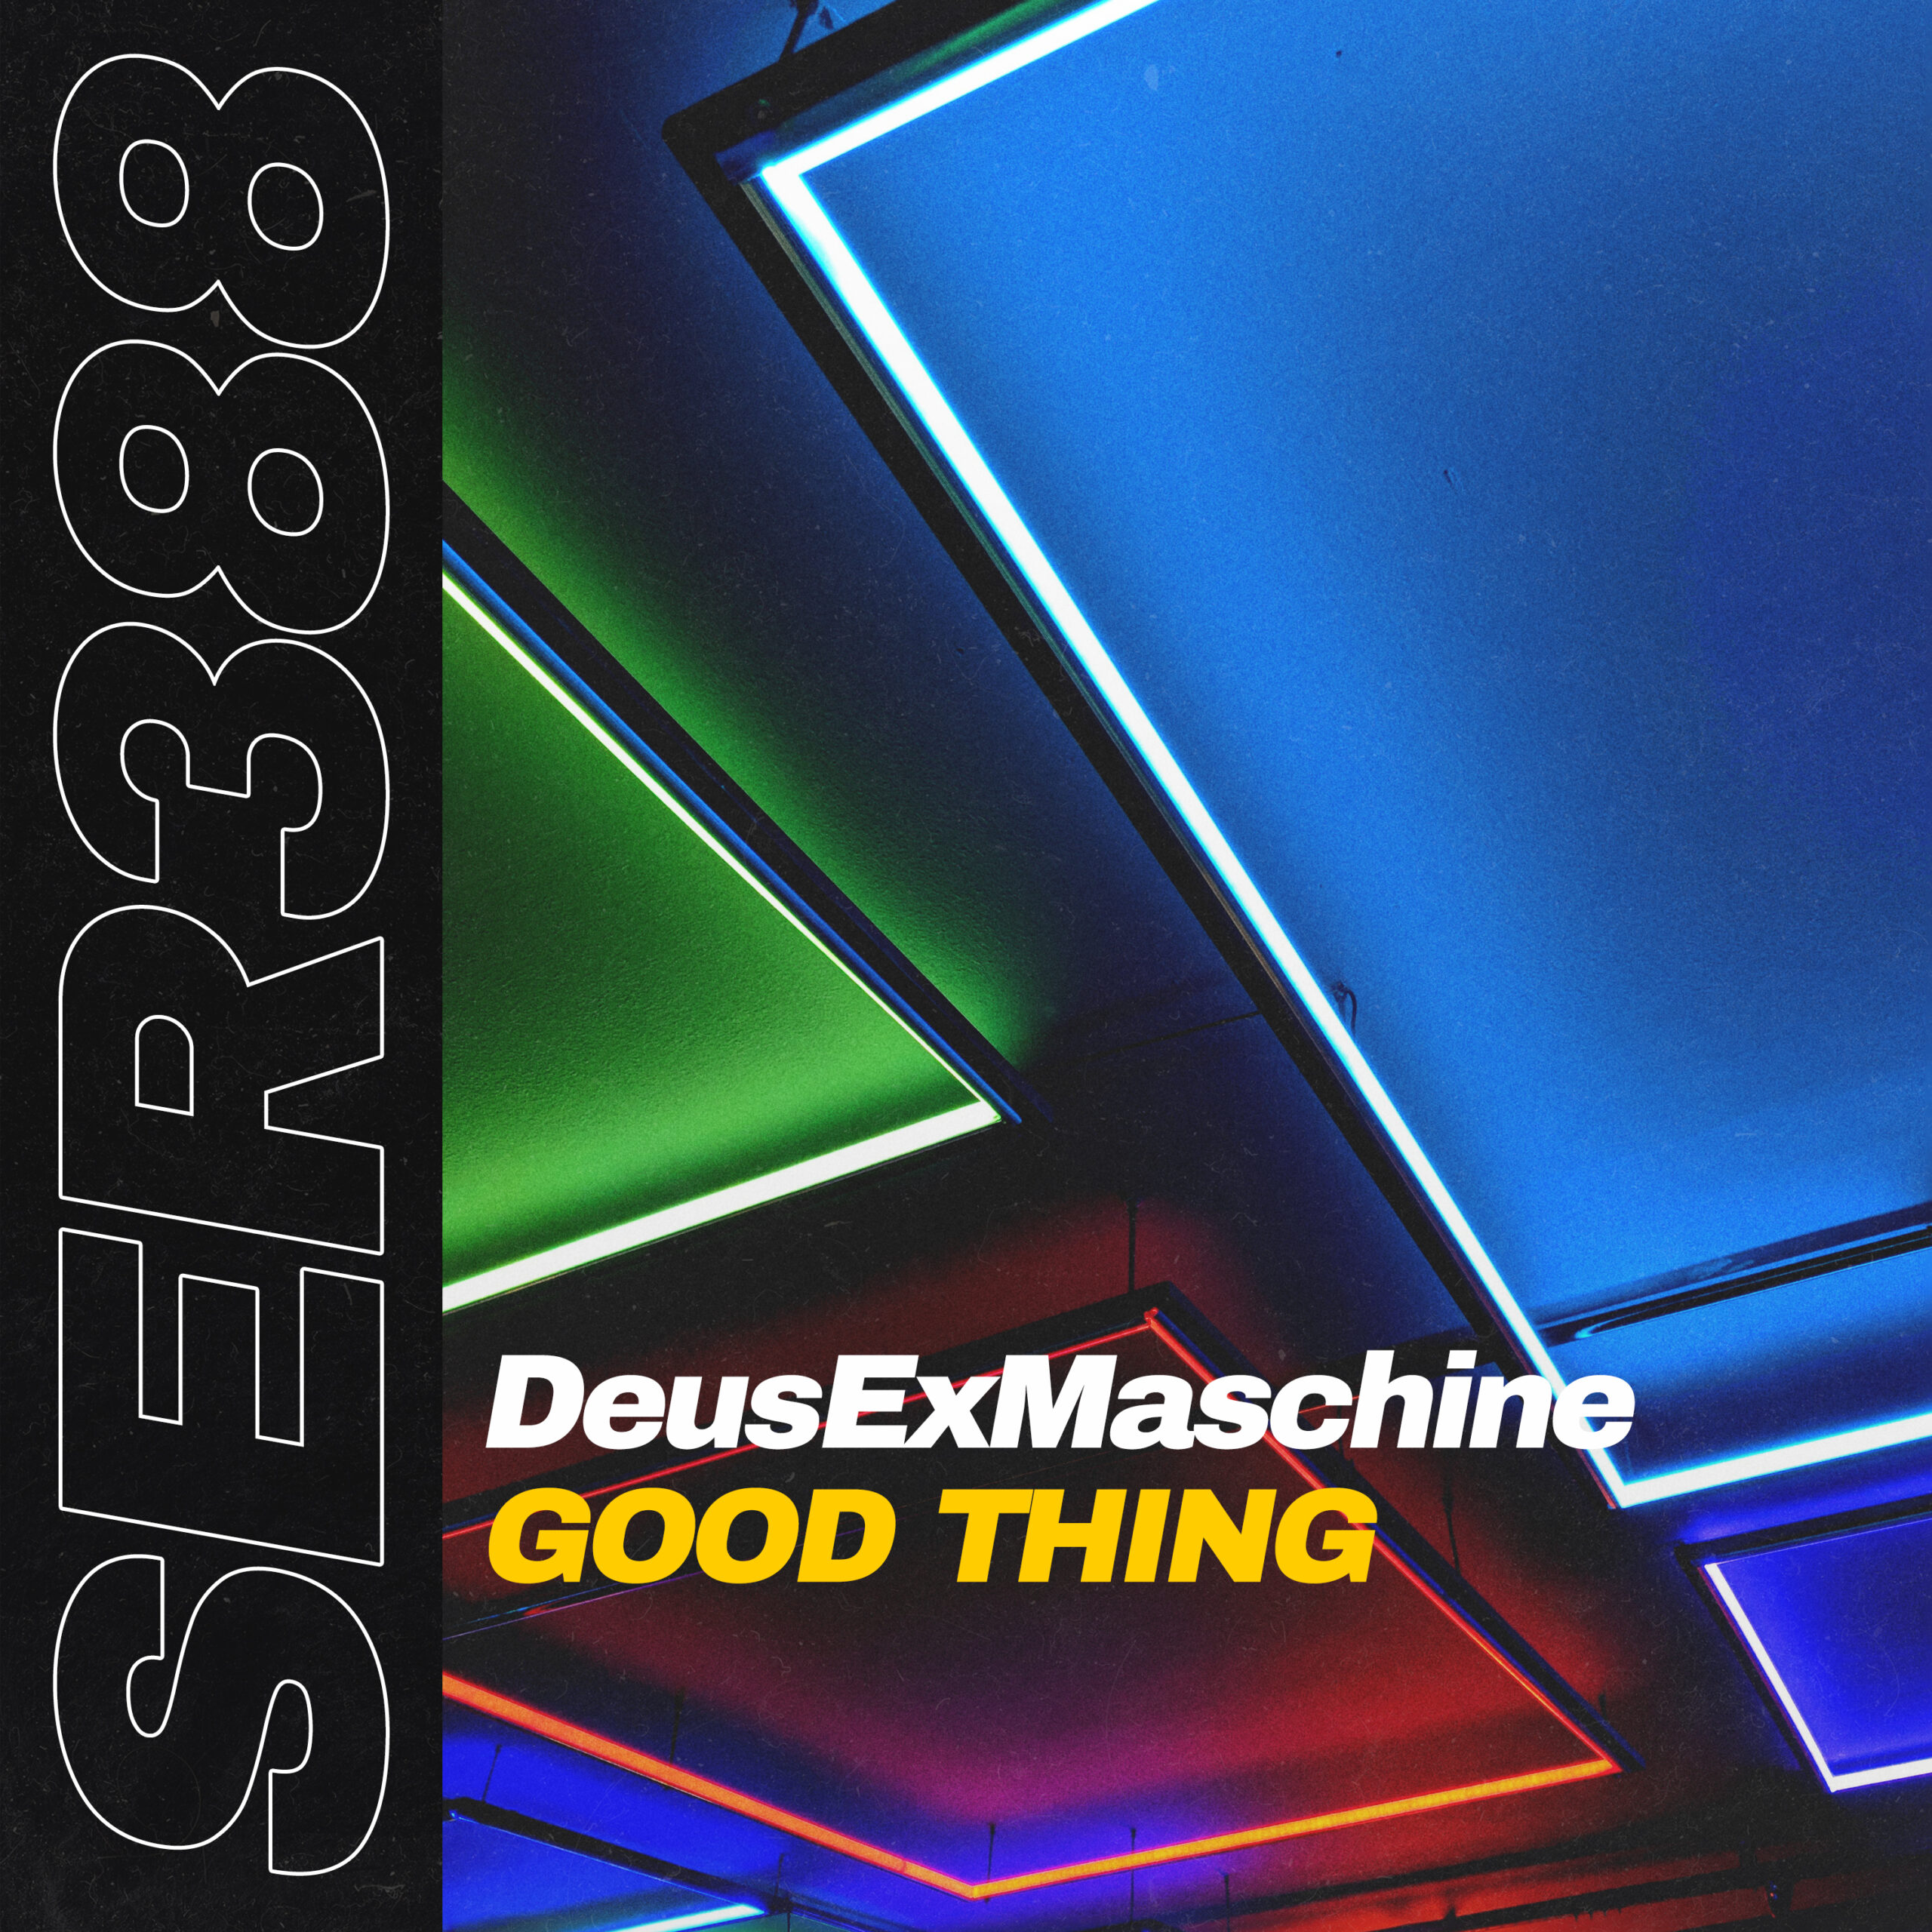 DEUSEXMASCHINE RETURNS ON SERIAL RECORDS WITH VOCAL DEEP HOUSE TRACK ‘GOOD THING’ 